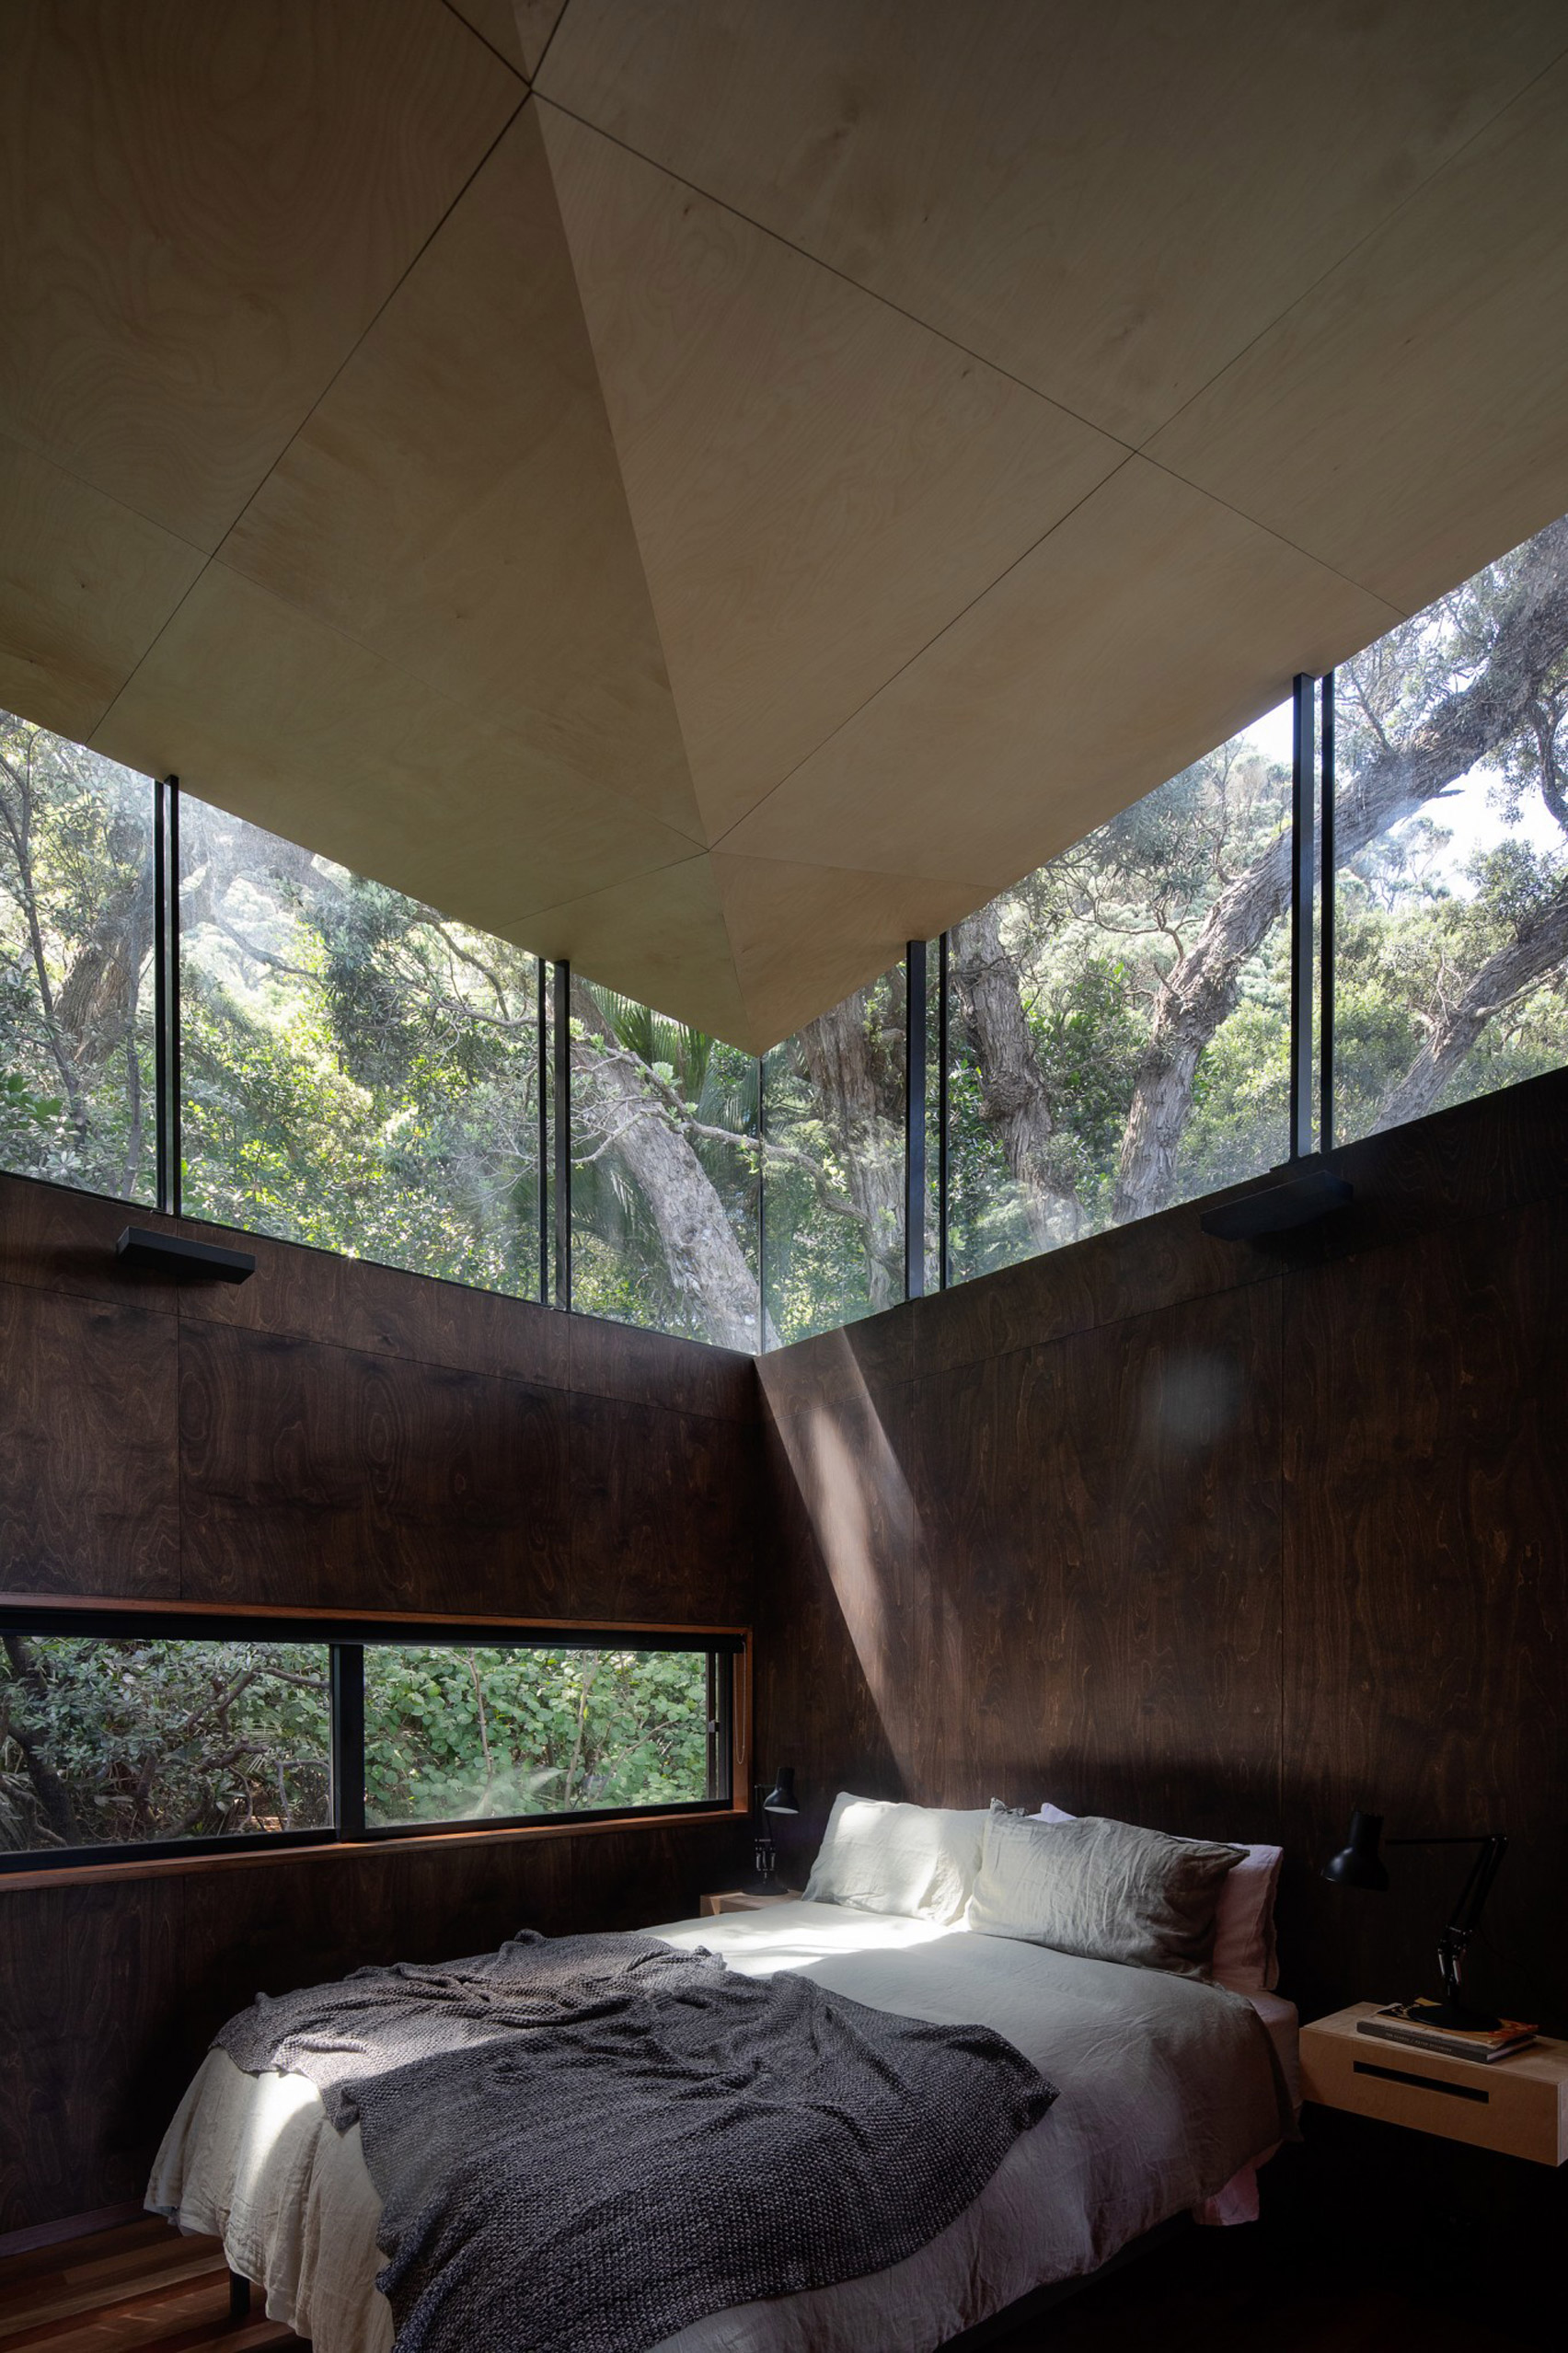 Modern design bedroom surrounded by trees